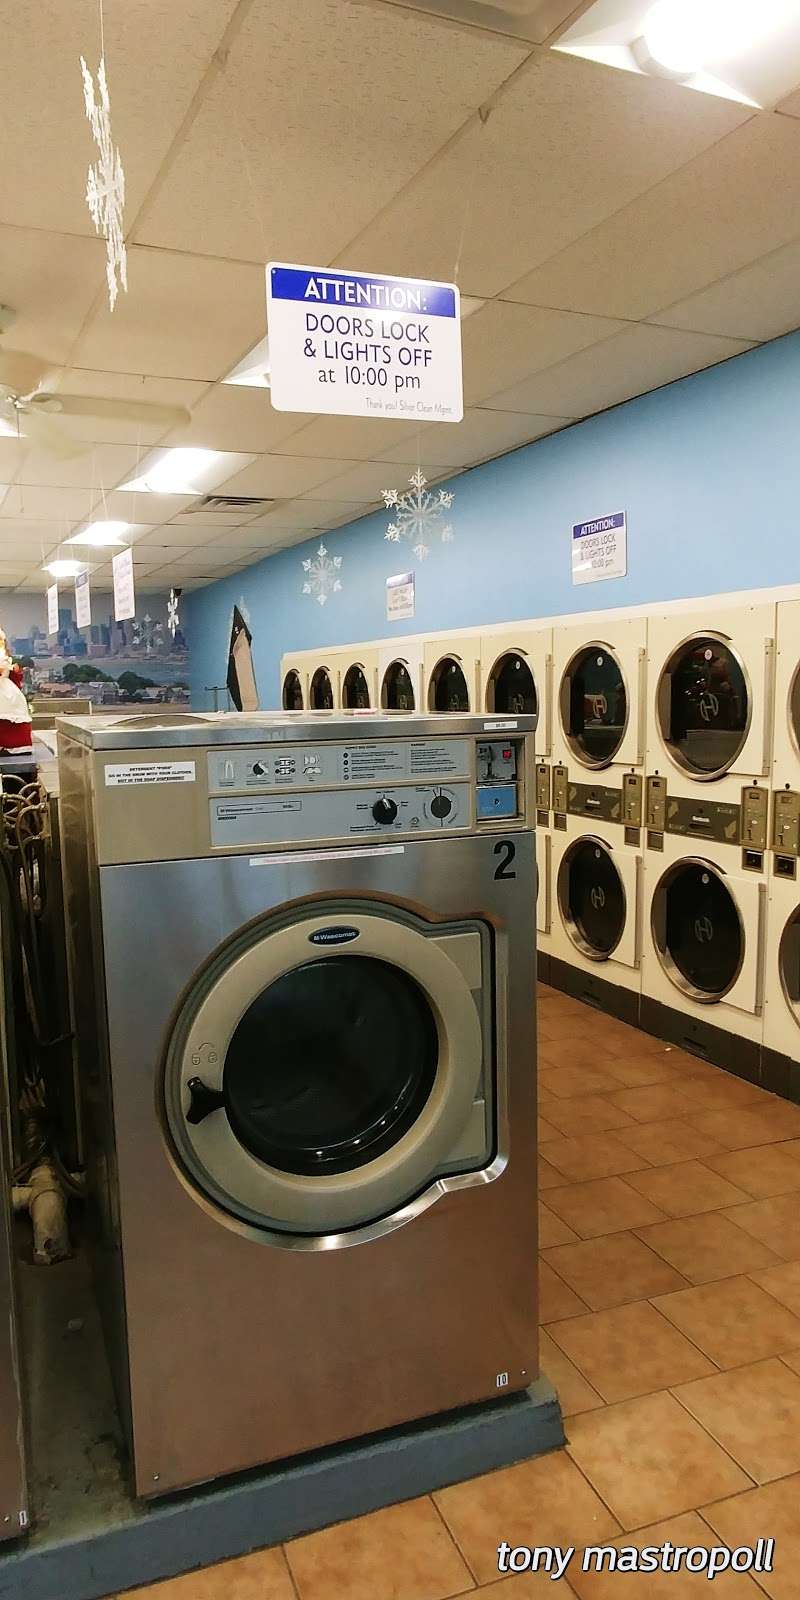 Silver Clean Laundromat - laundry  | Photo 4 of 10 | Address: 41 Crest Ave, Winthrop, MA 02152, USA | Phone: (617) 846-0955